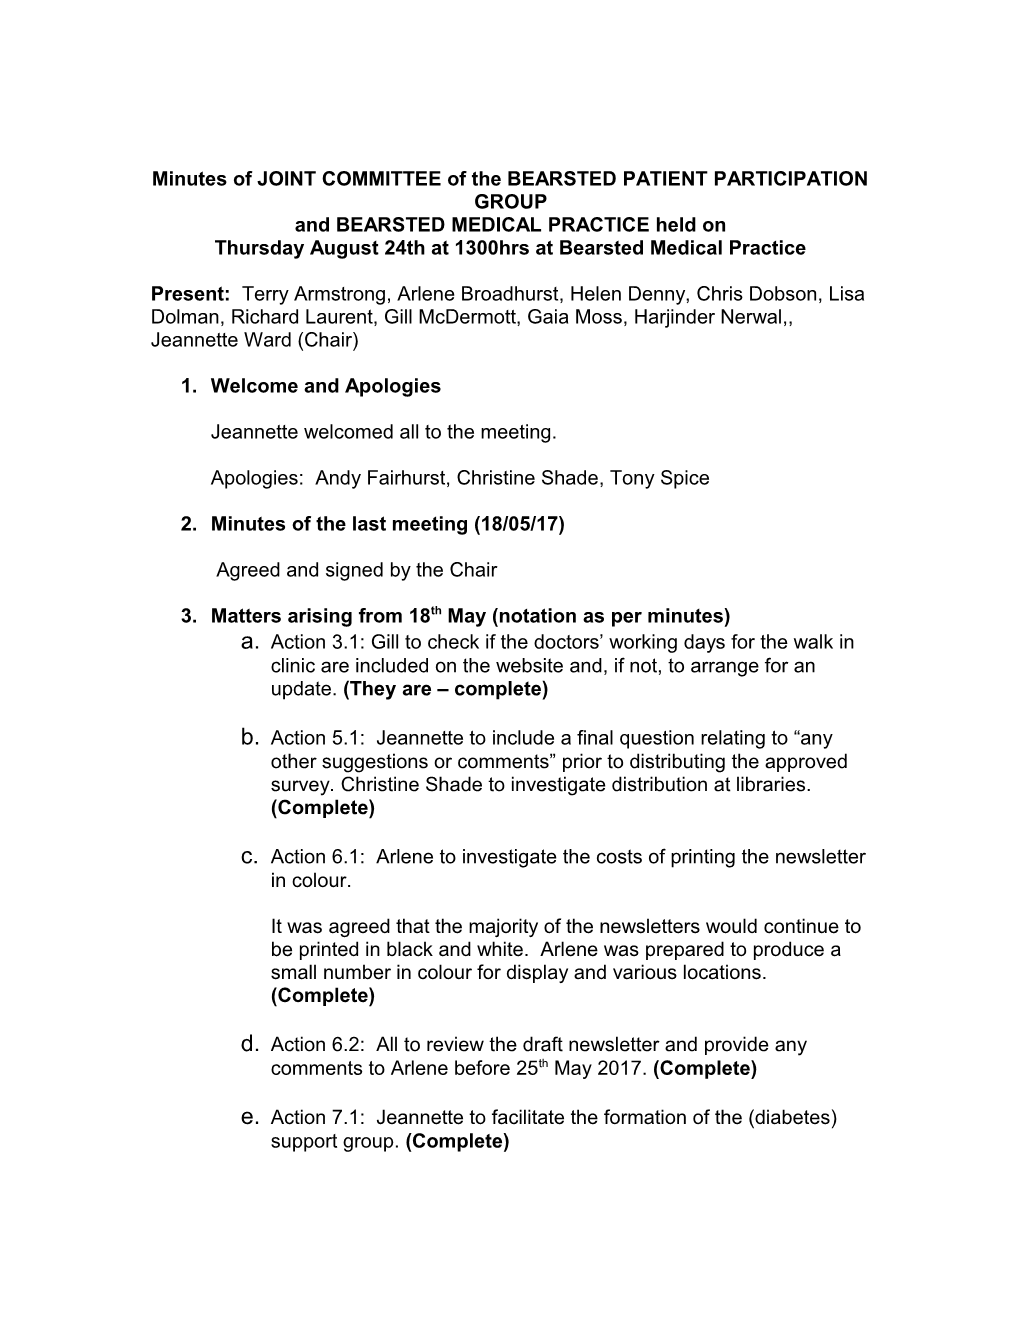 Minutes of JOINT COMMITTEE of the BEARSTED PATIENT PARTICIPATION GROUP